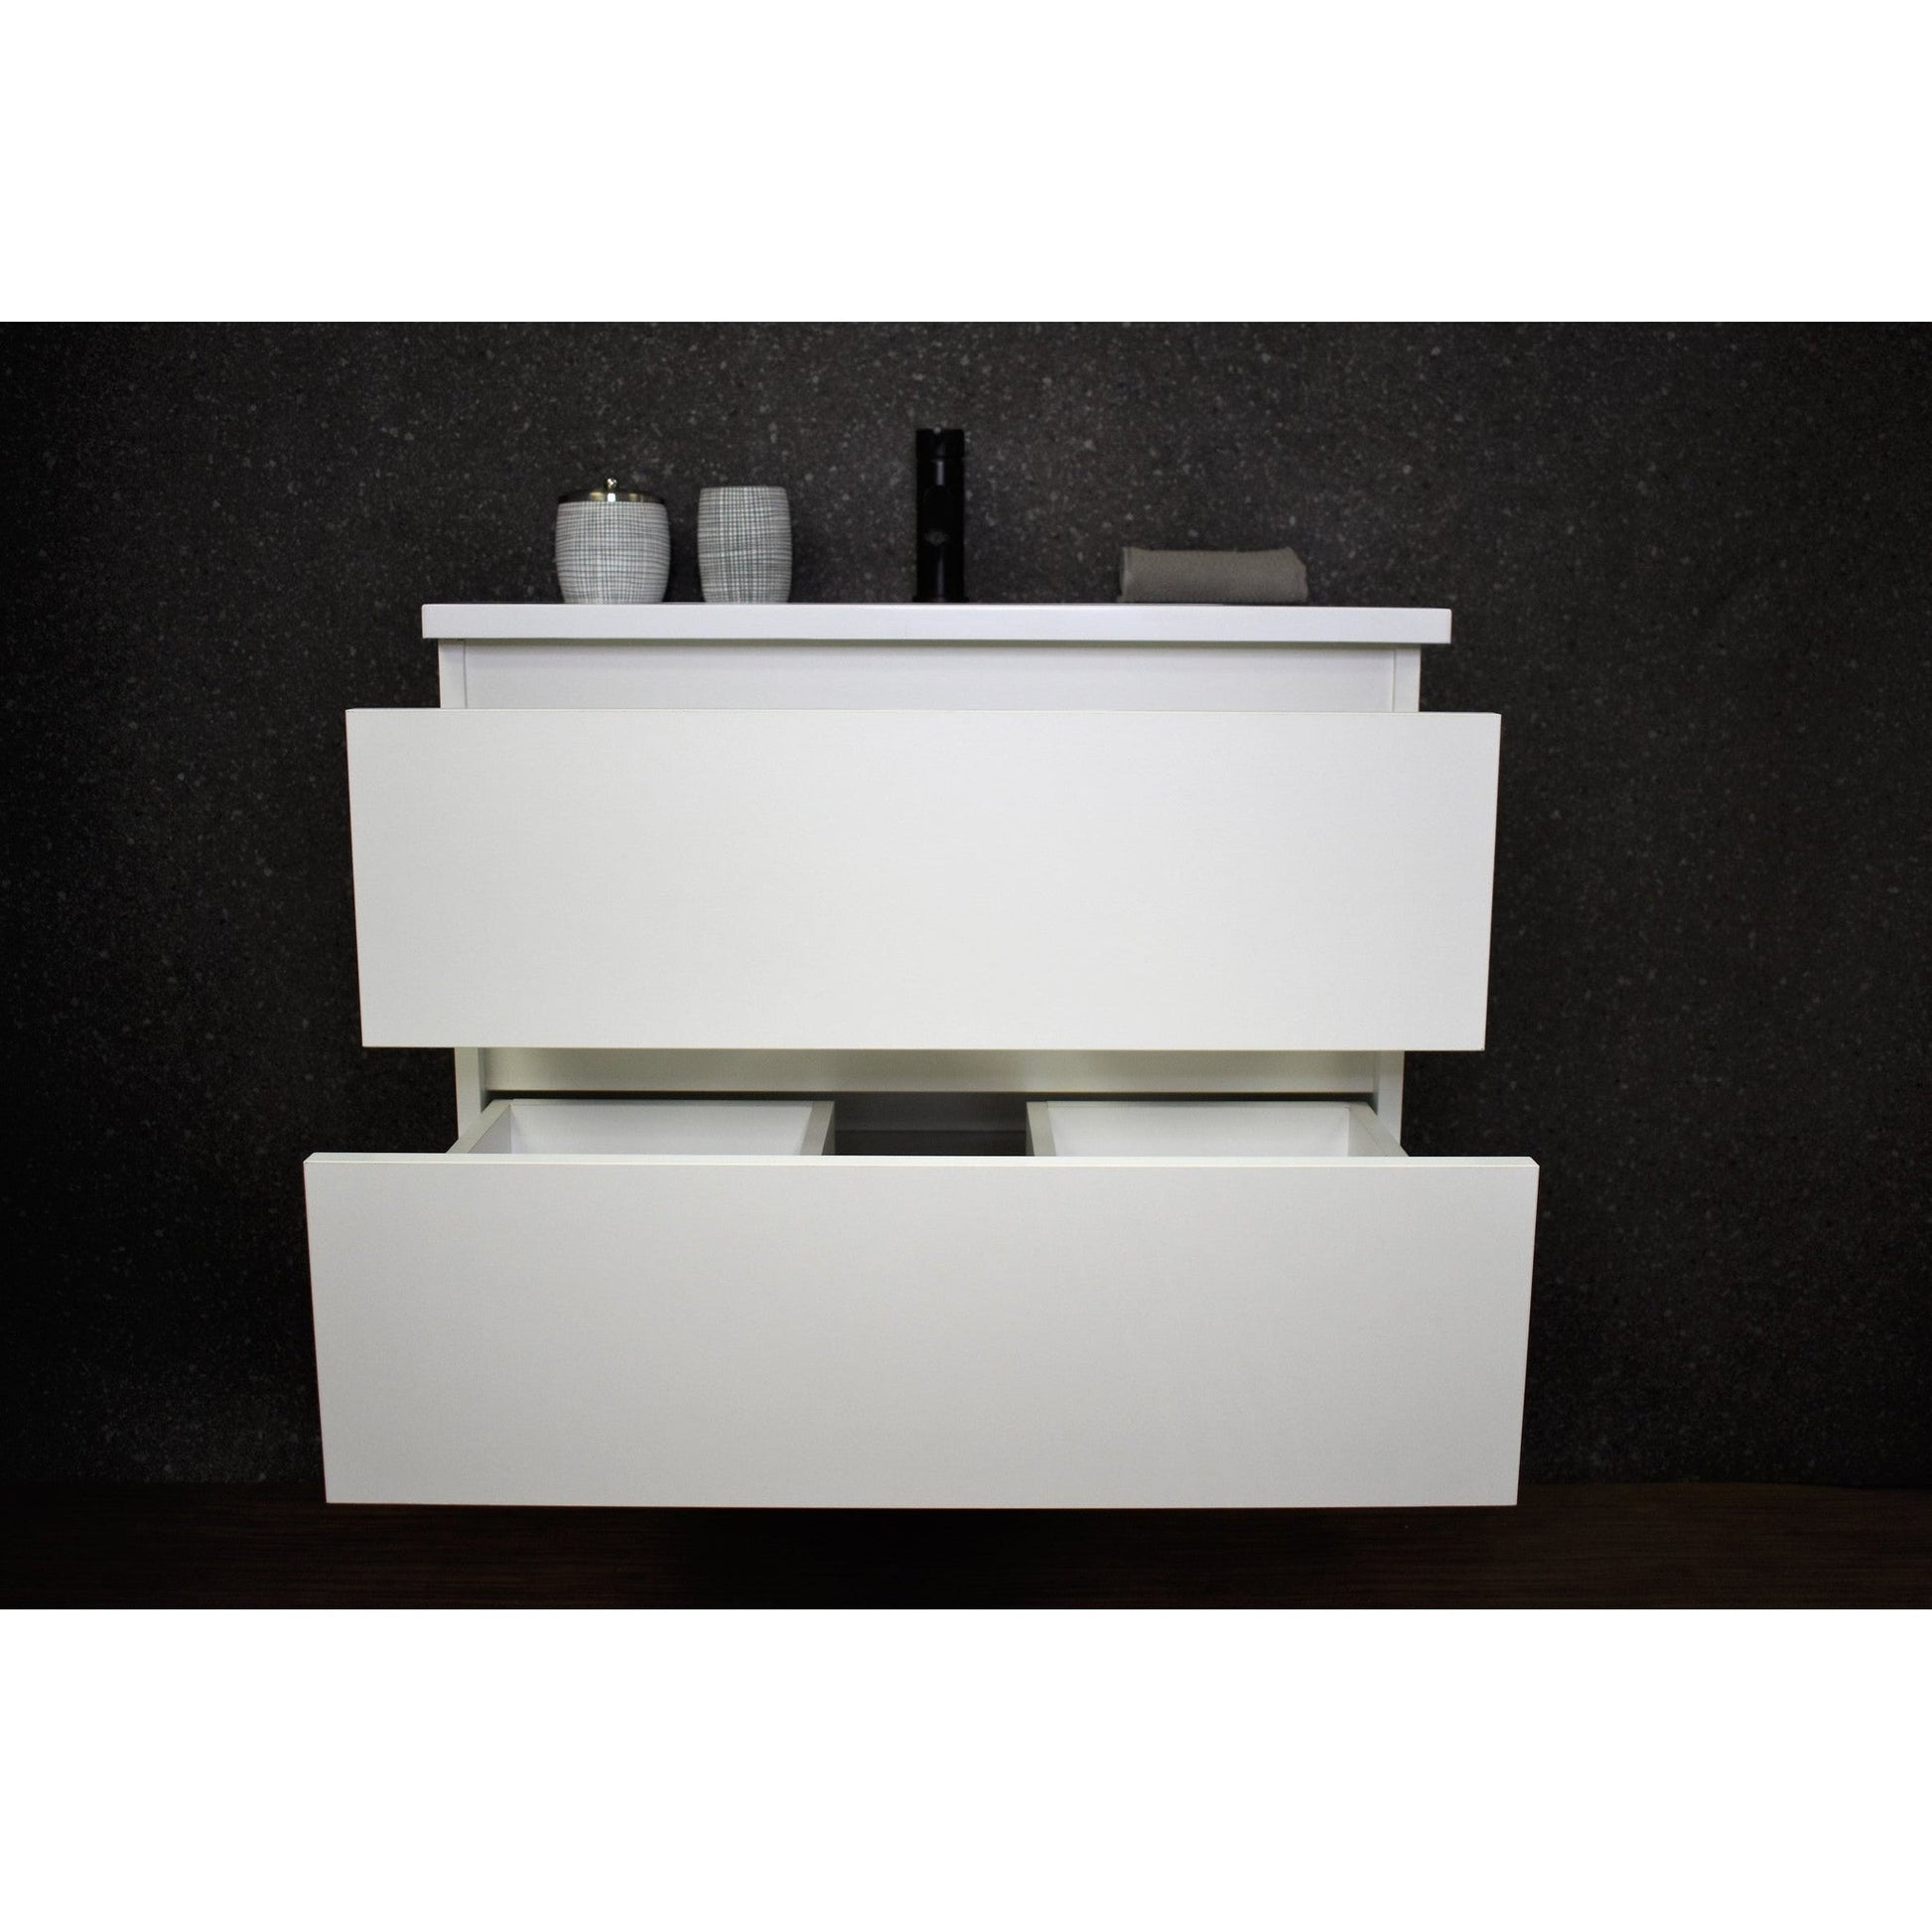 Volpa USA Salt 24" x 20" White Wall-Mounted Floating Bathroom Vanity With Drawers, Acrylic Top and Integrated Acrylic Sink